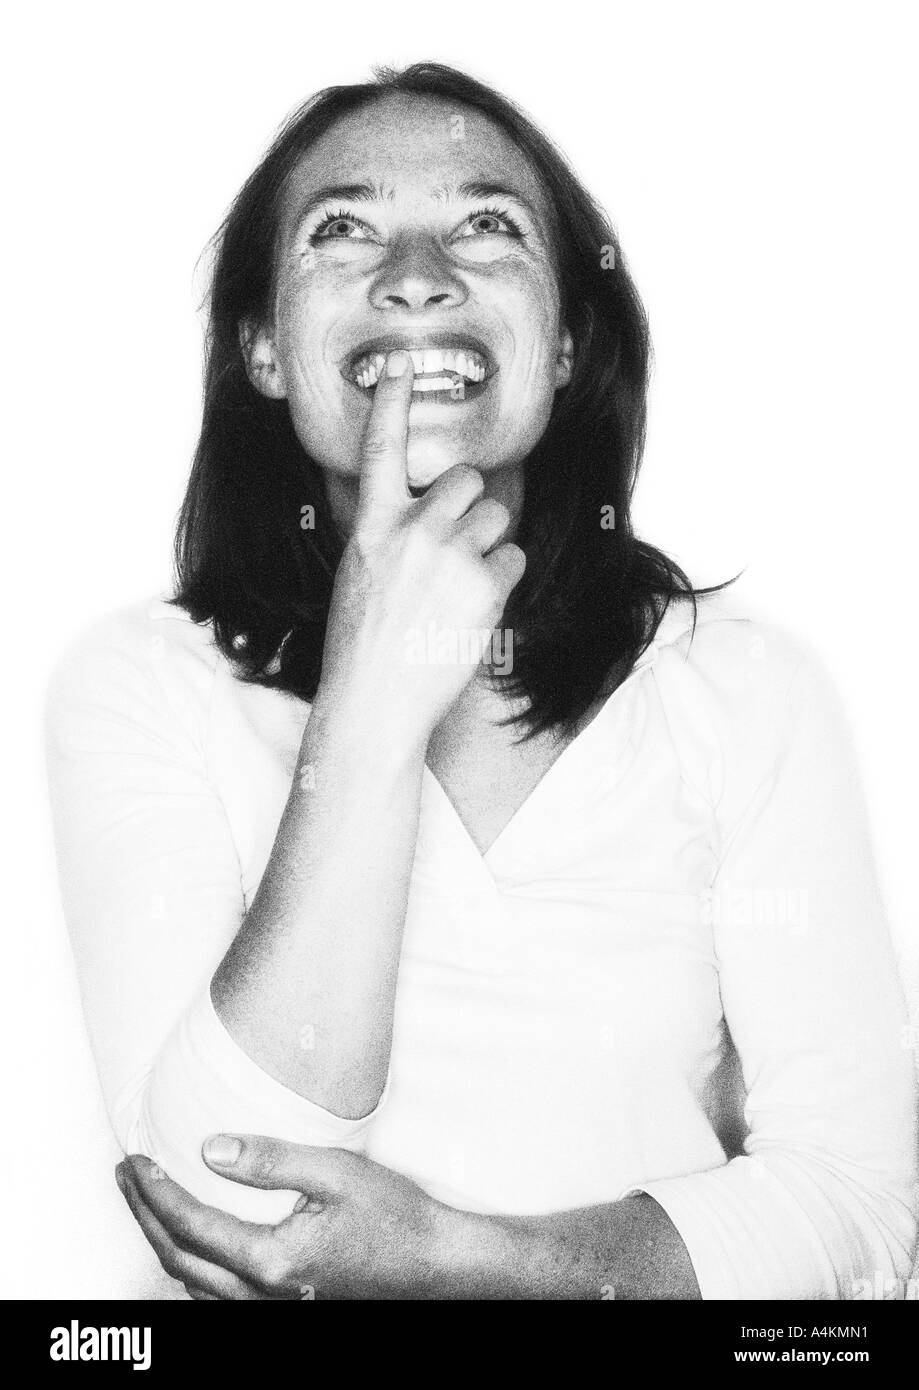 Woman smiling, finger on mouth, portrait, b&w. Stock Photo